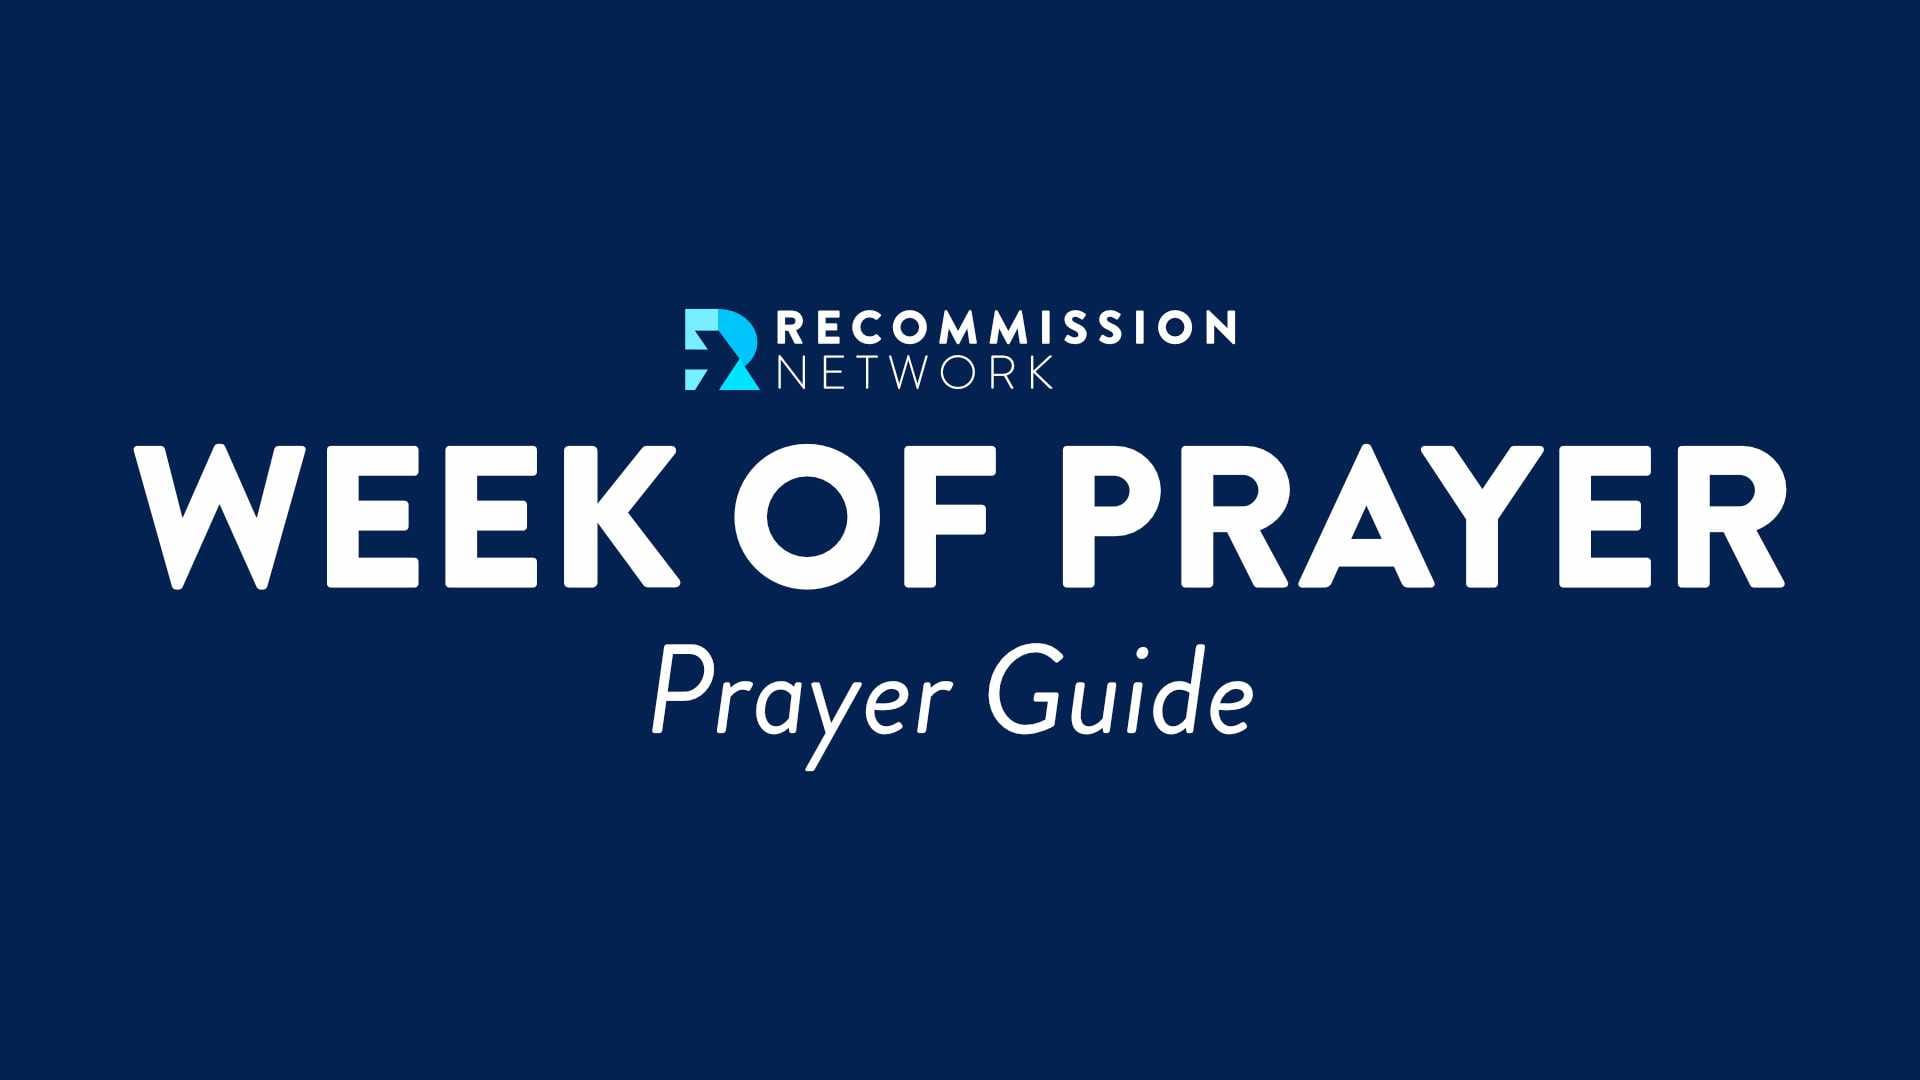 Recommission Week of Prayer [January 9-16]